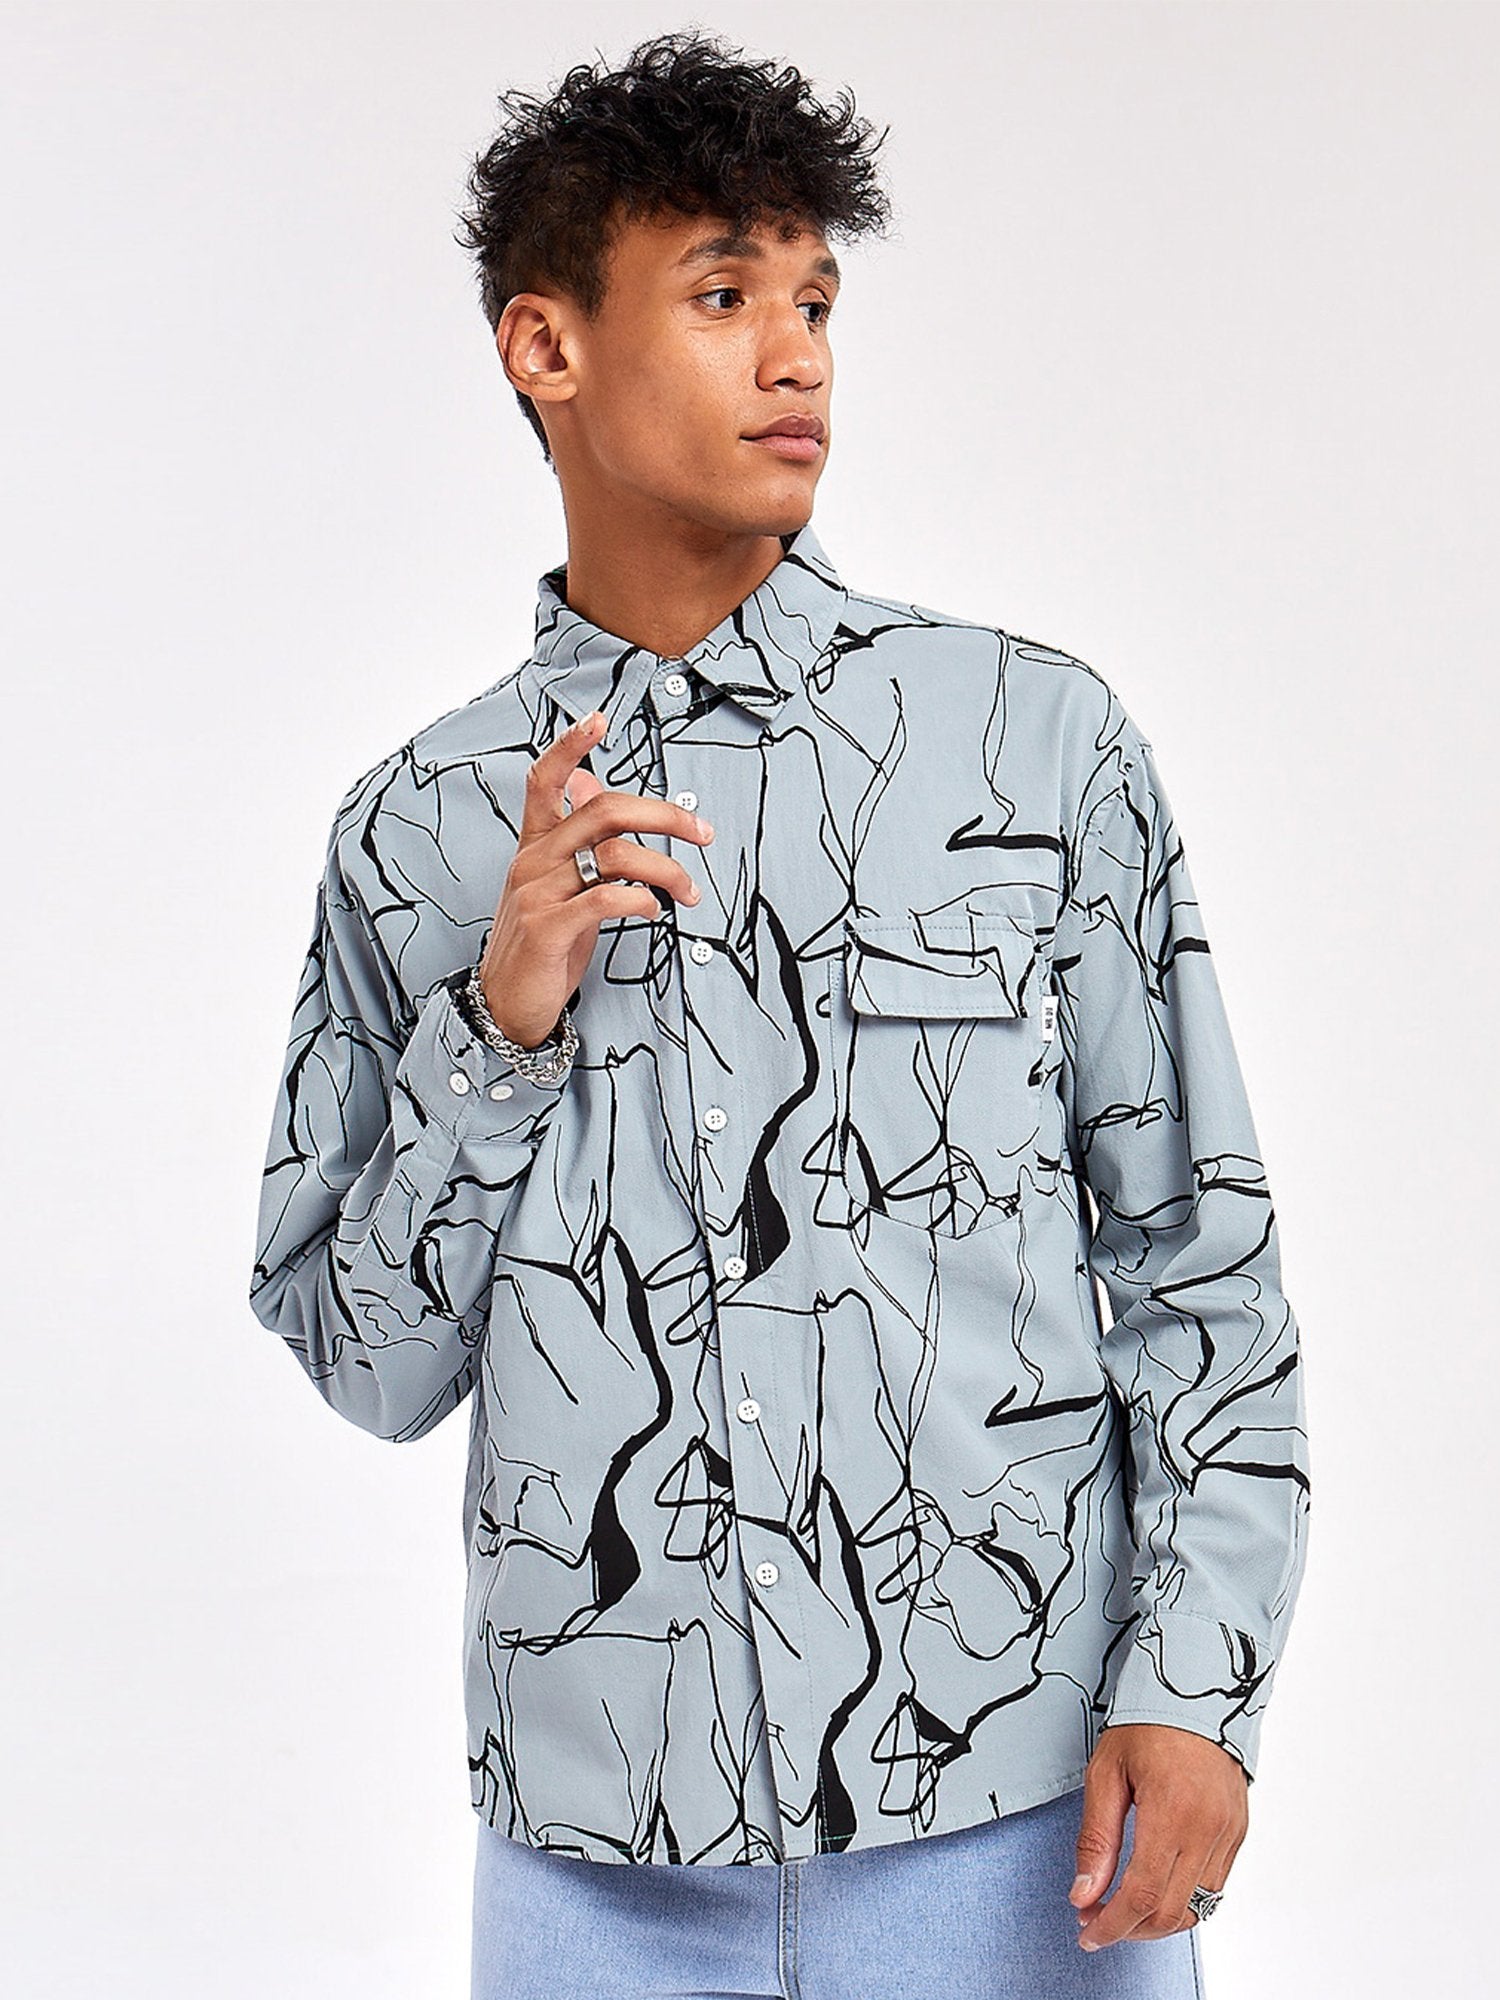 Collar Shirts with Long Sleeve Print Cotton Turn-down